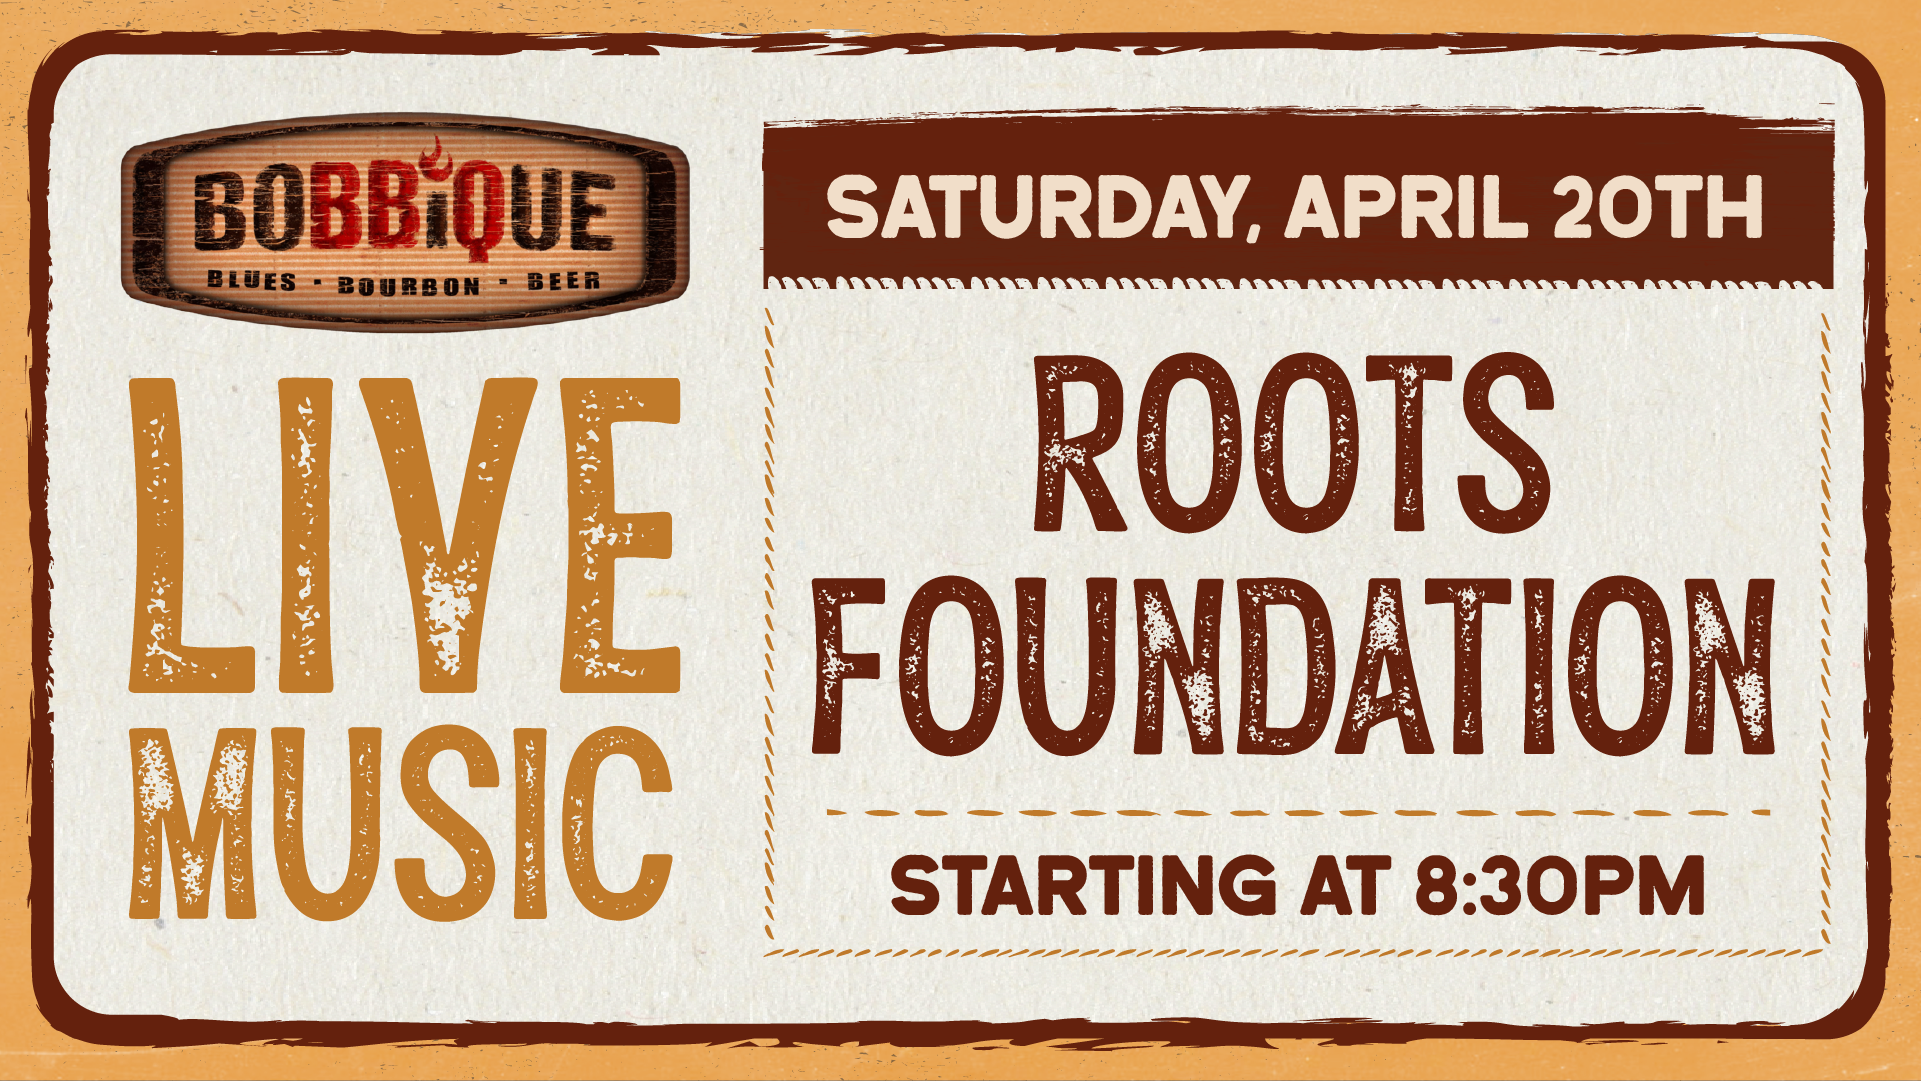 Live Music at Bobbique by The Roots Foundation April 20th at 8:30pm!